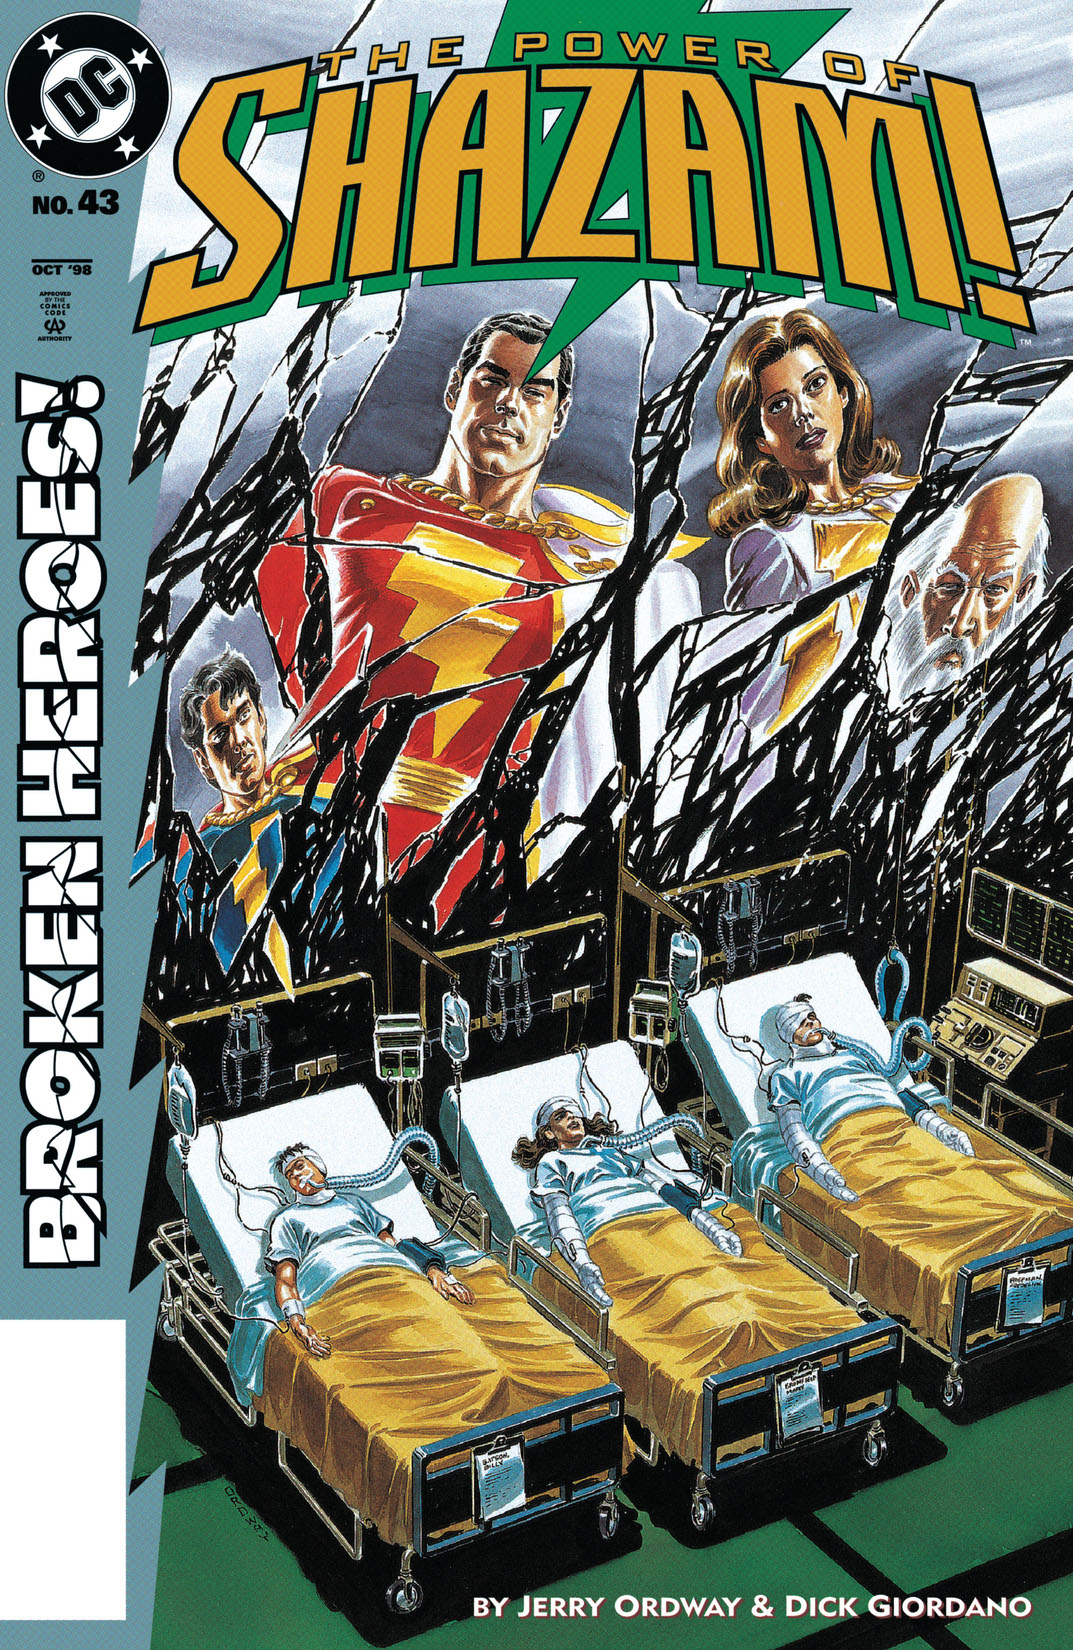 The Power of Shazam! #43 preview images